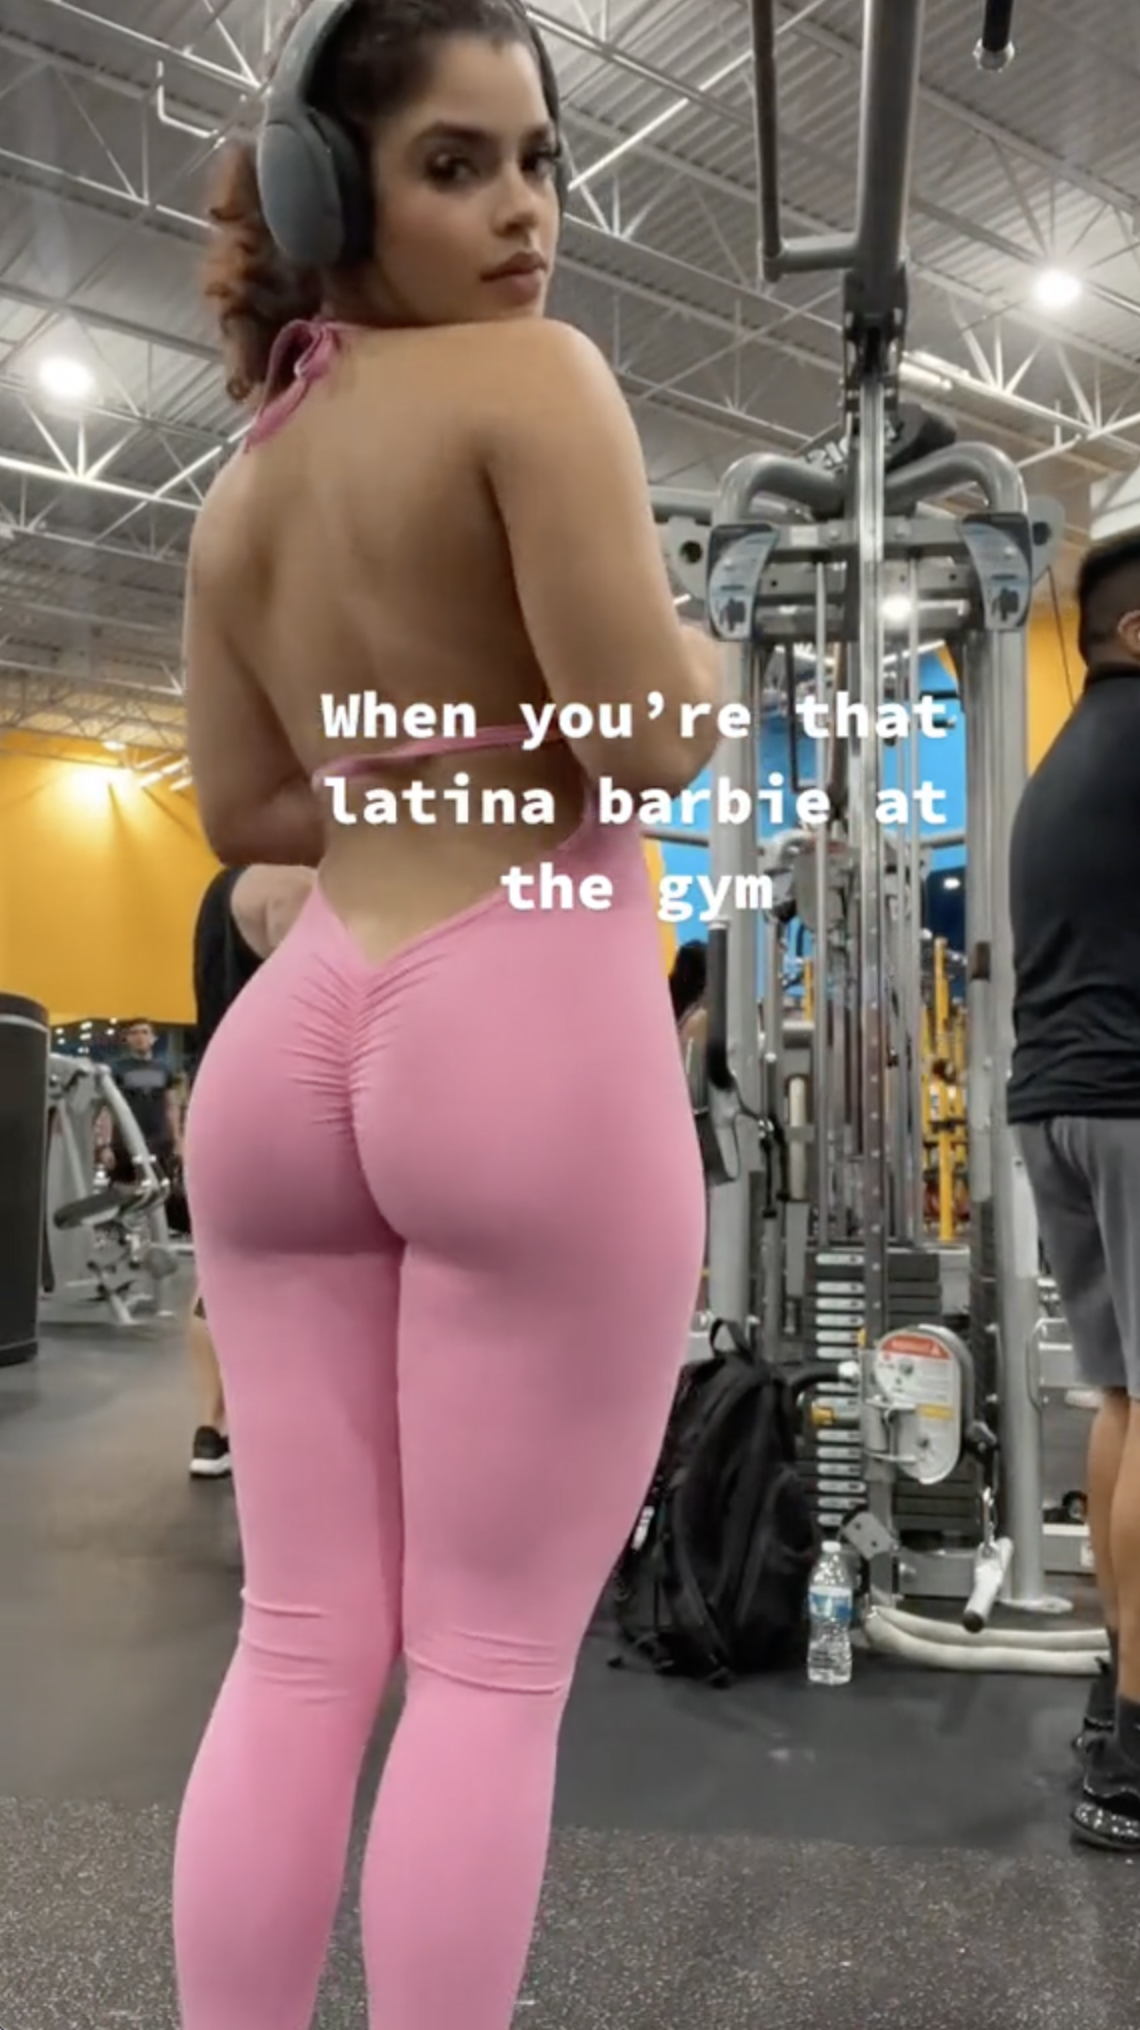 brooke tomlin recommends sexy latina booty pic